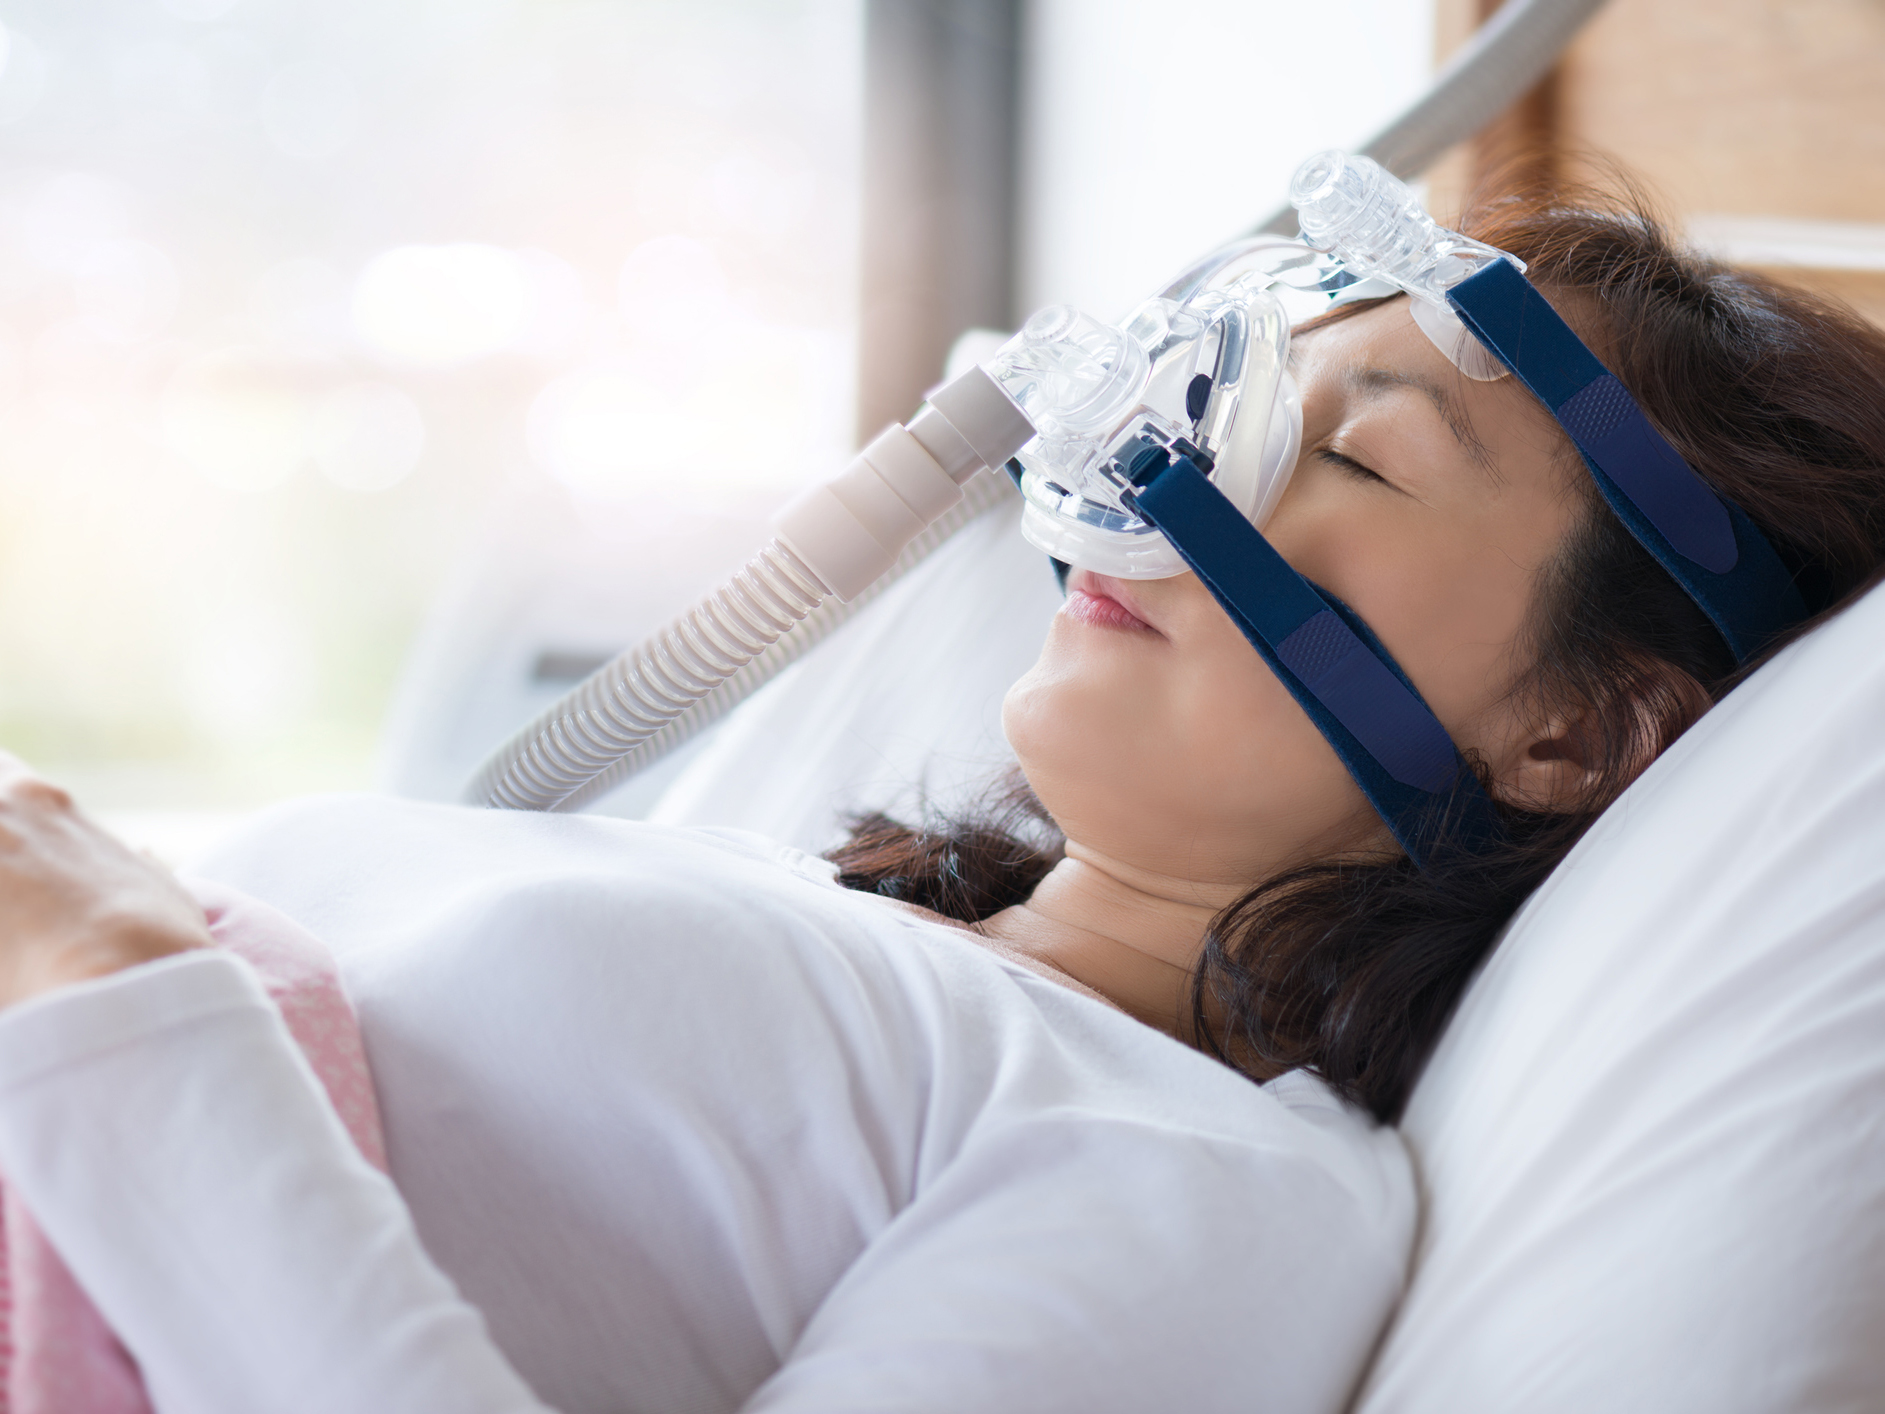 Women with sleep apnea have a cancer concern they may not know about